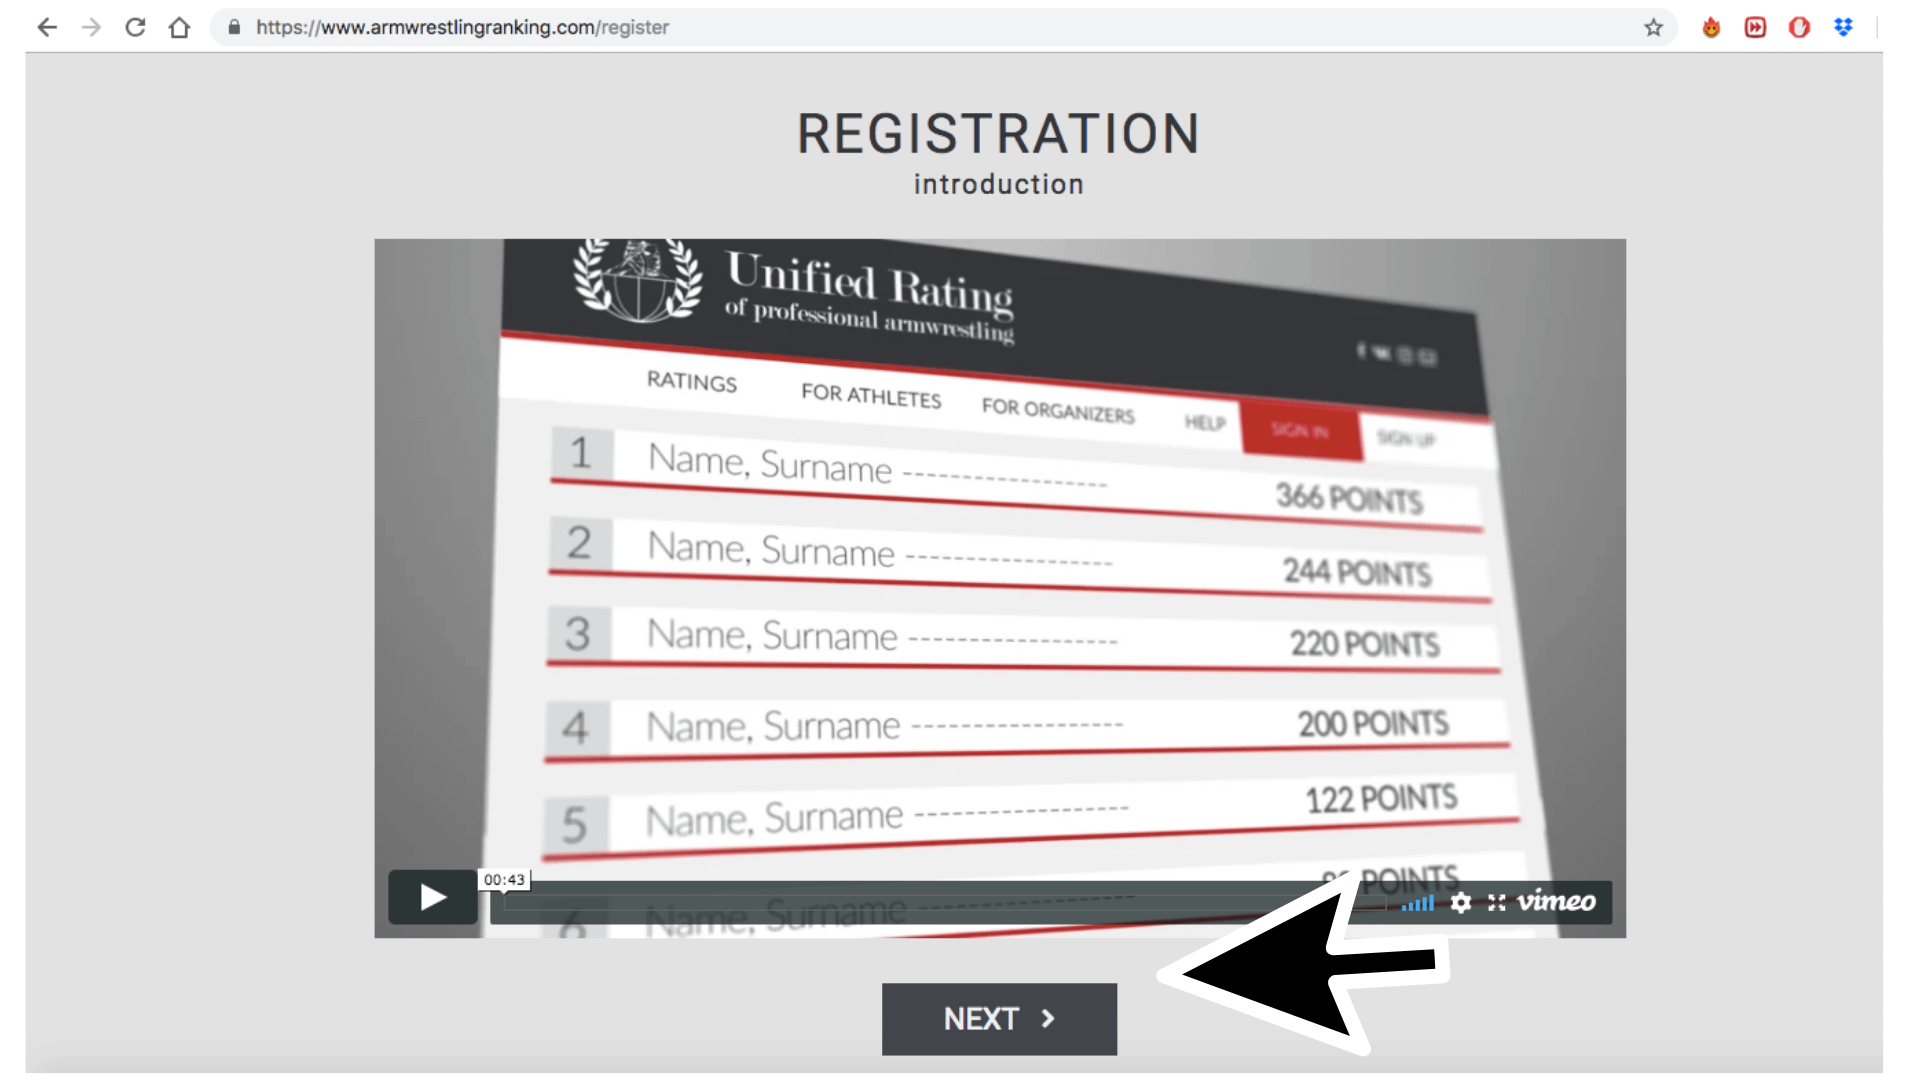 A Step-by-Step Guide to Your URPA Registration